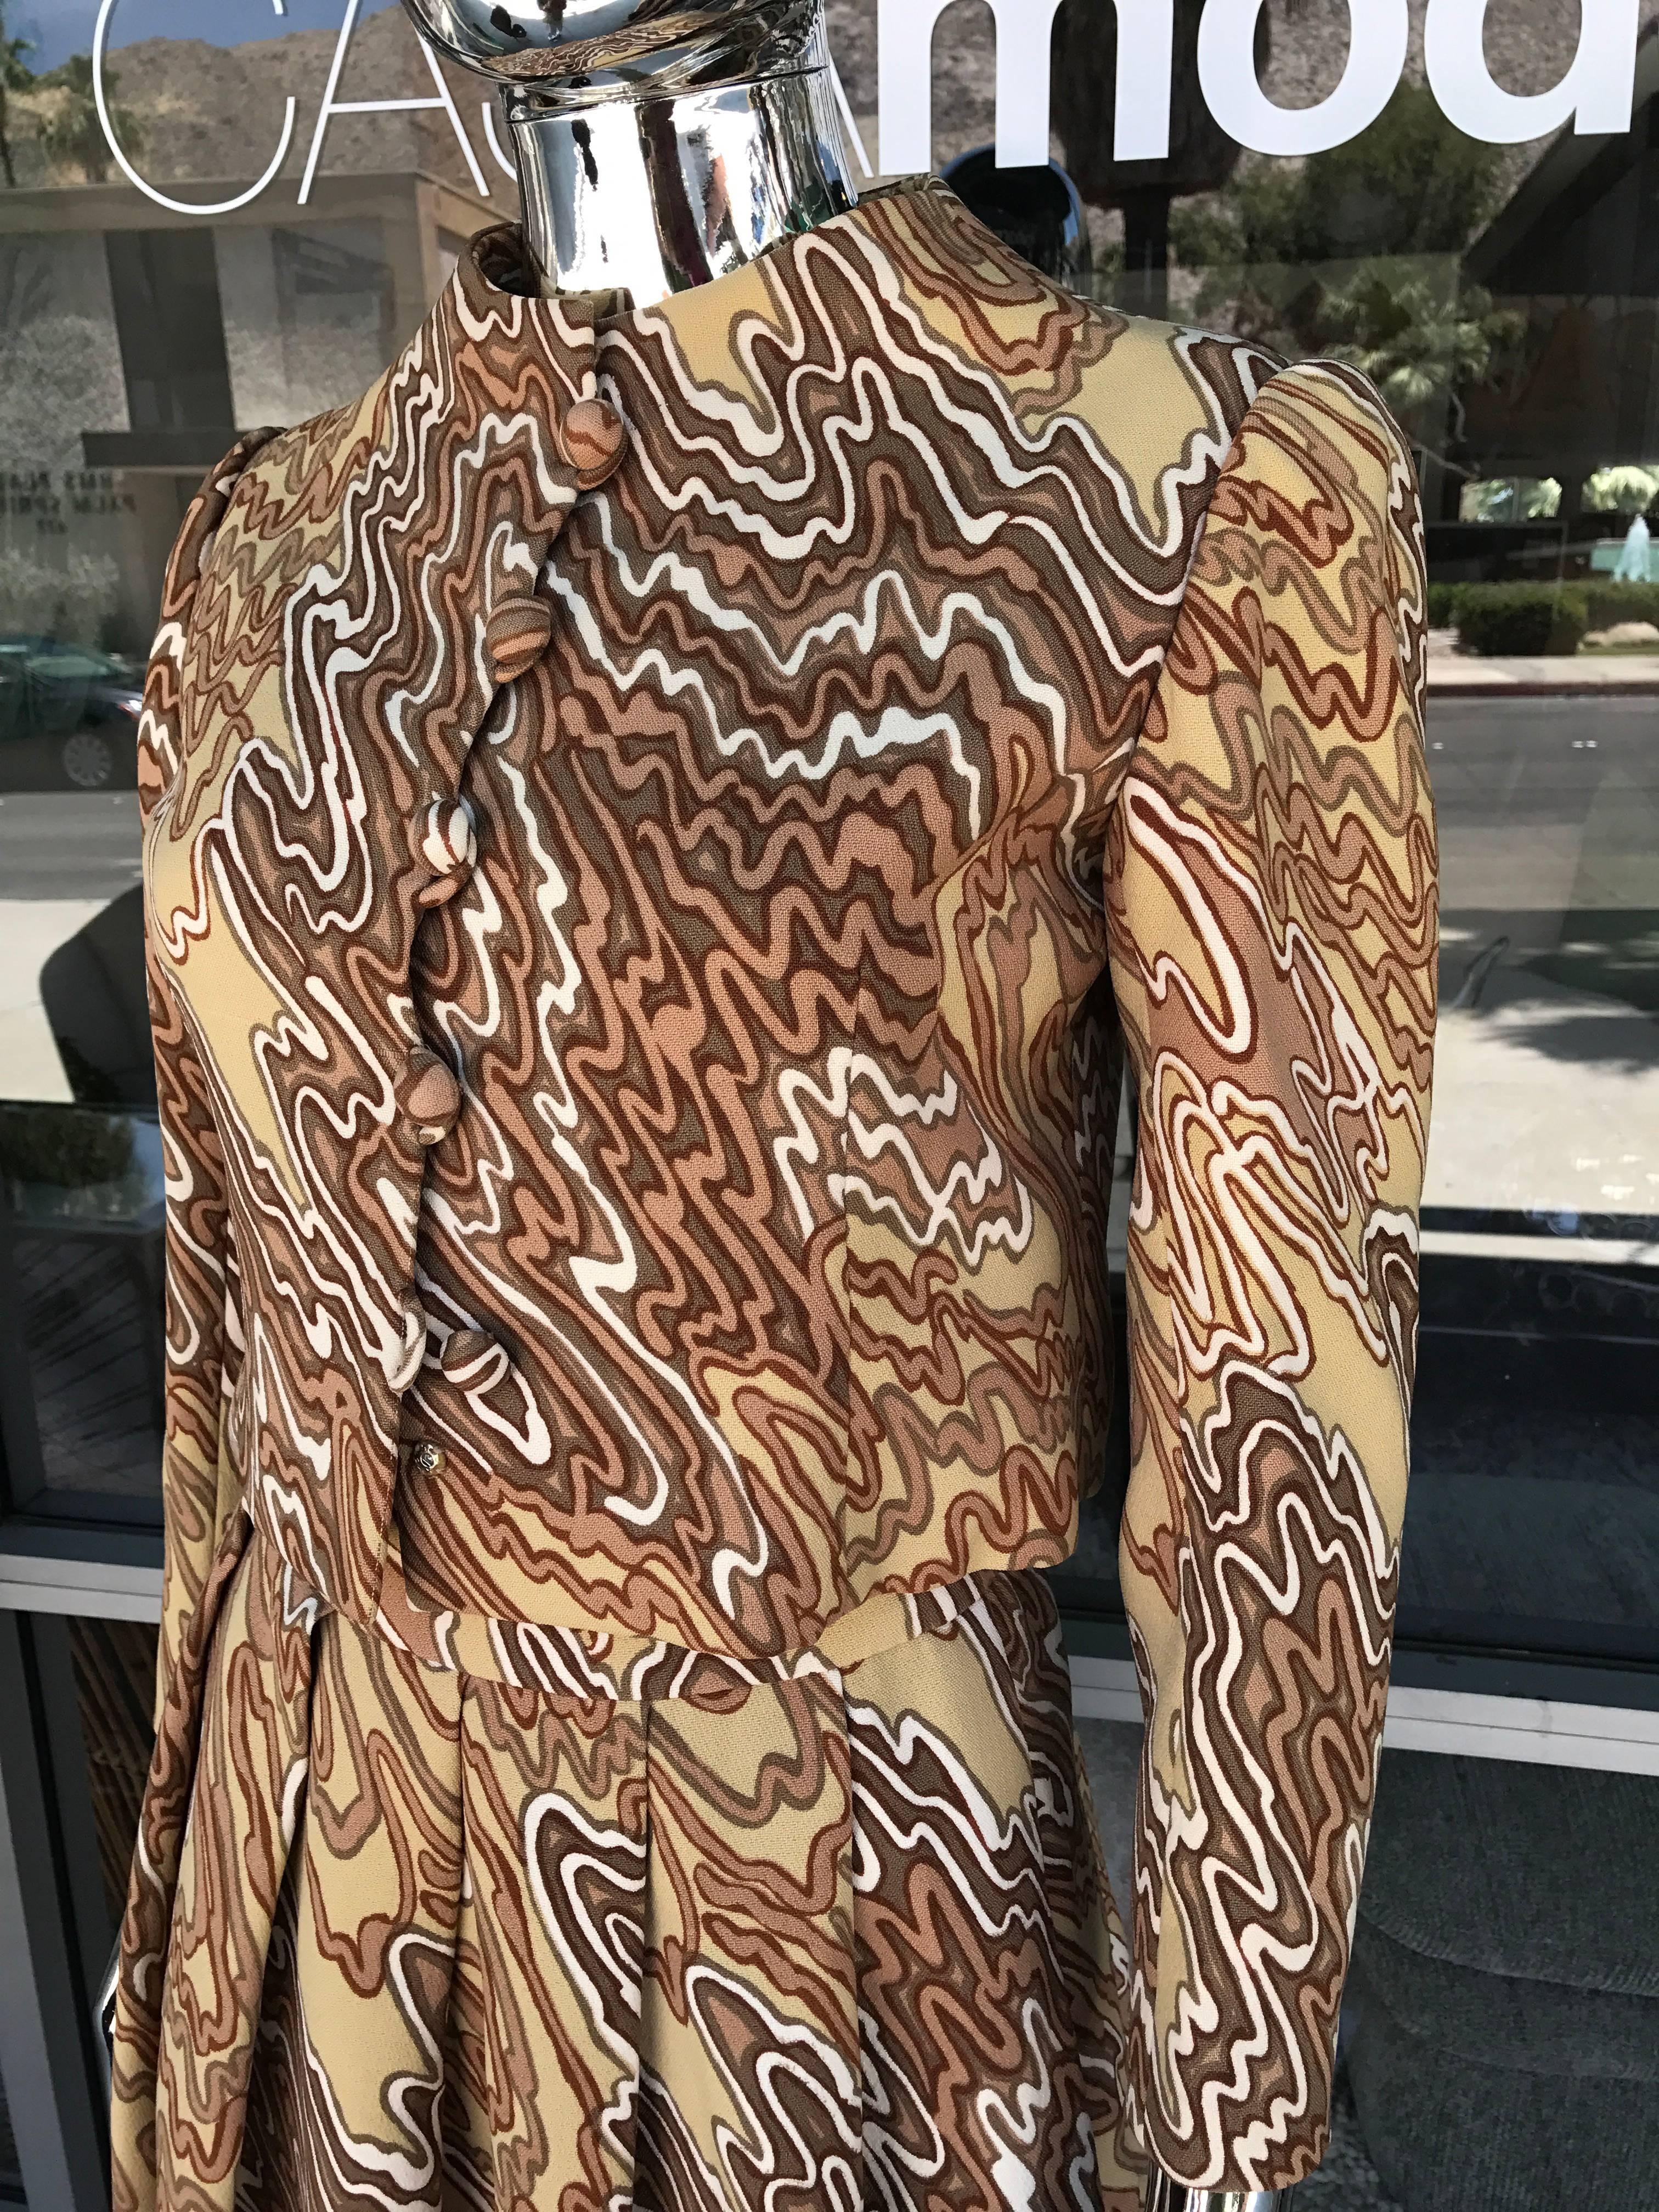 A really beautiful three-piece suit by legendary designer Arnold Scassi. Couture Jacket, skirt and blouse made by hand in NYC. The print is a very modern 1970s wool blend and blouse is coordinating print in silk. All pieces marked Arnold Scassi. I